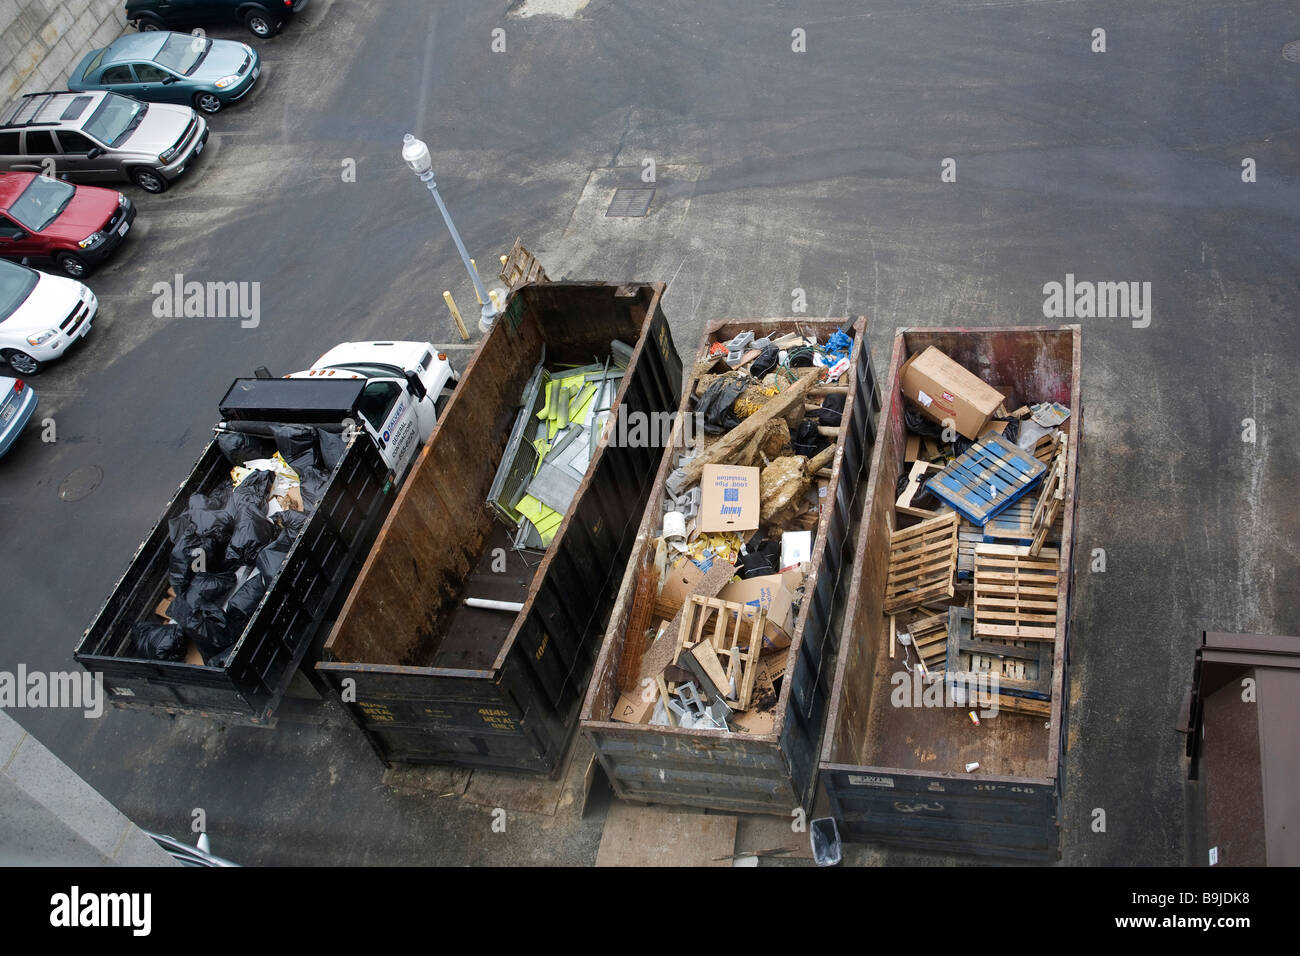 Birds eye view of trash containers in carpark Stock Photo